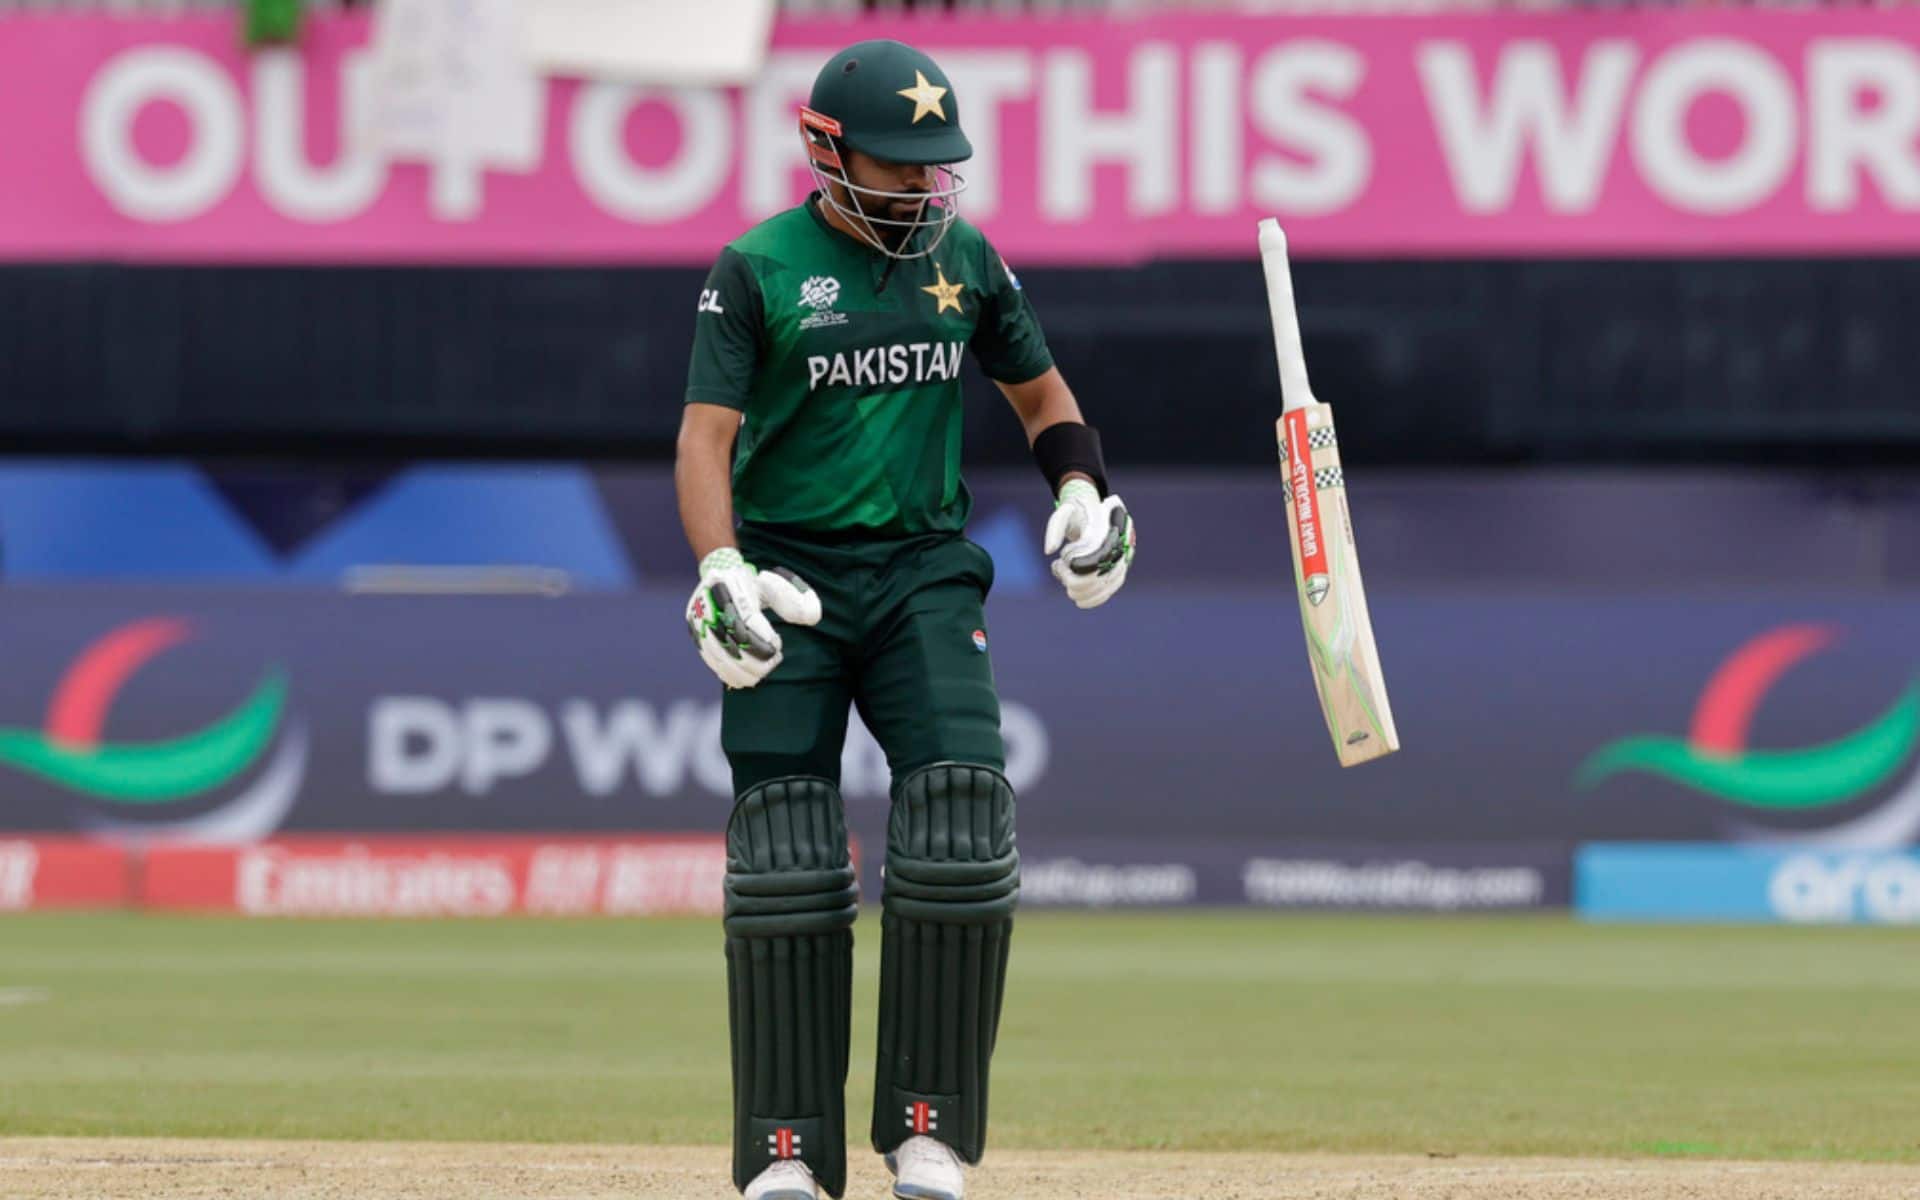 Babar Secure As The Pakistan White Ball Captain: Reports